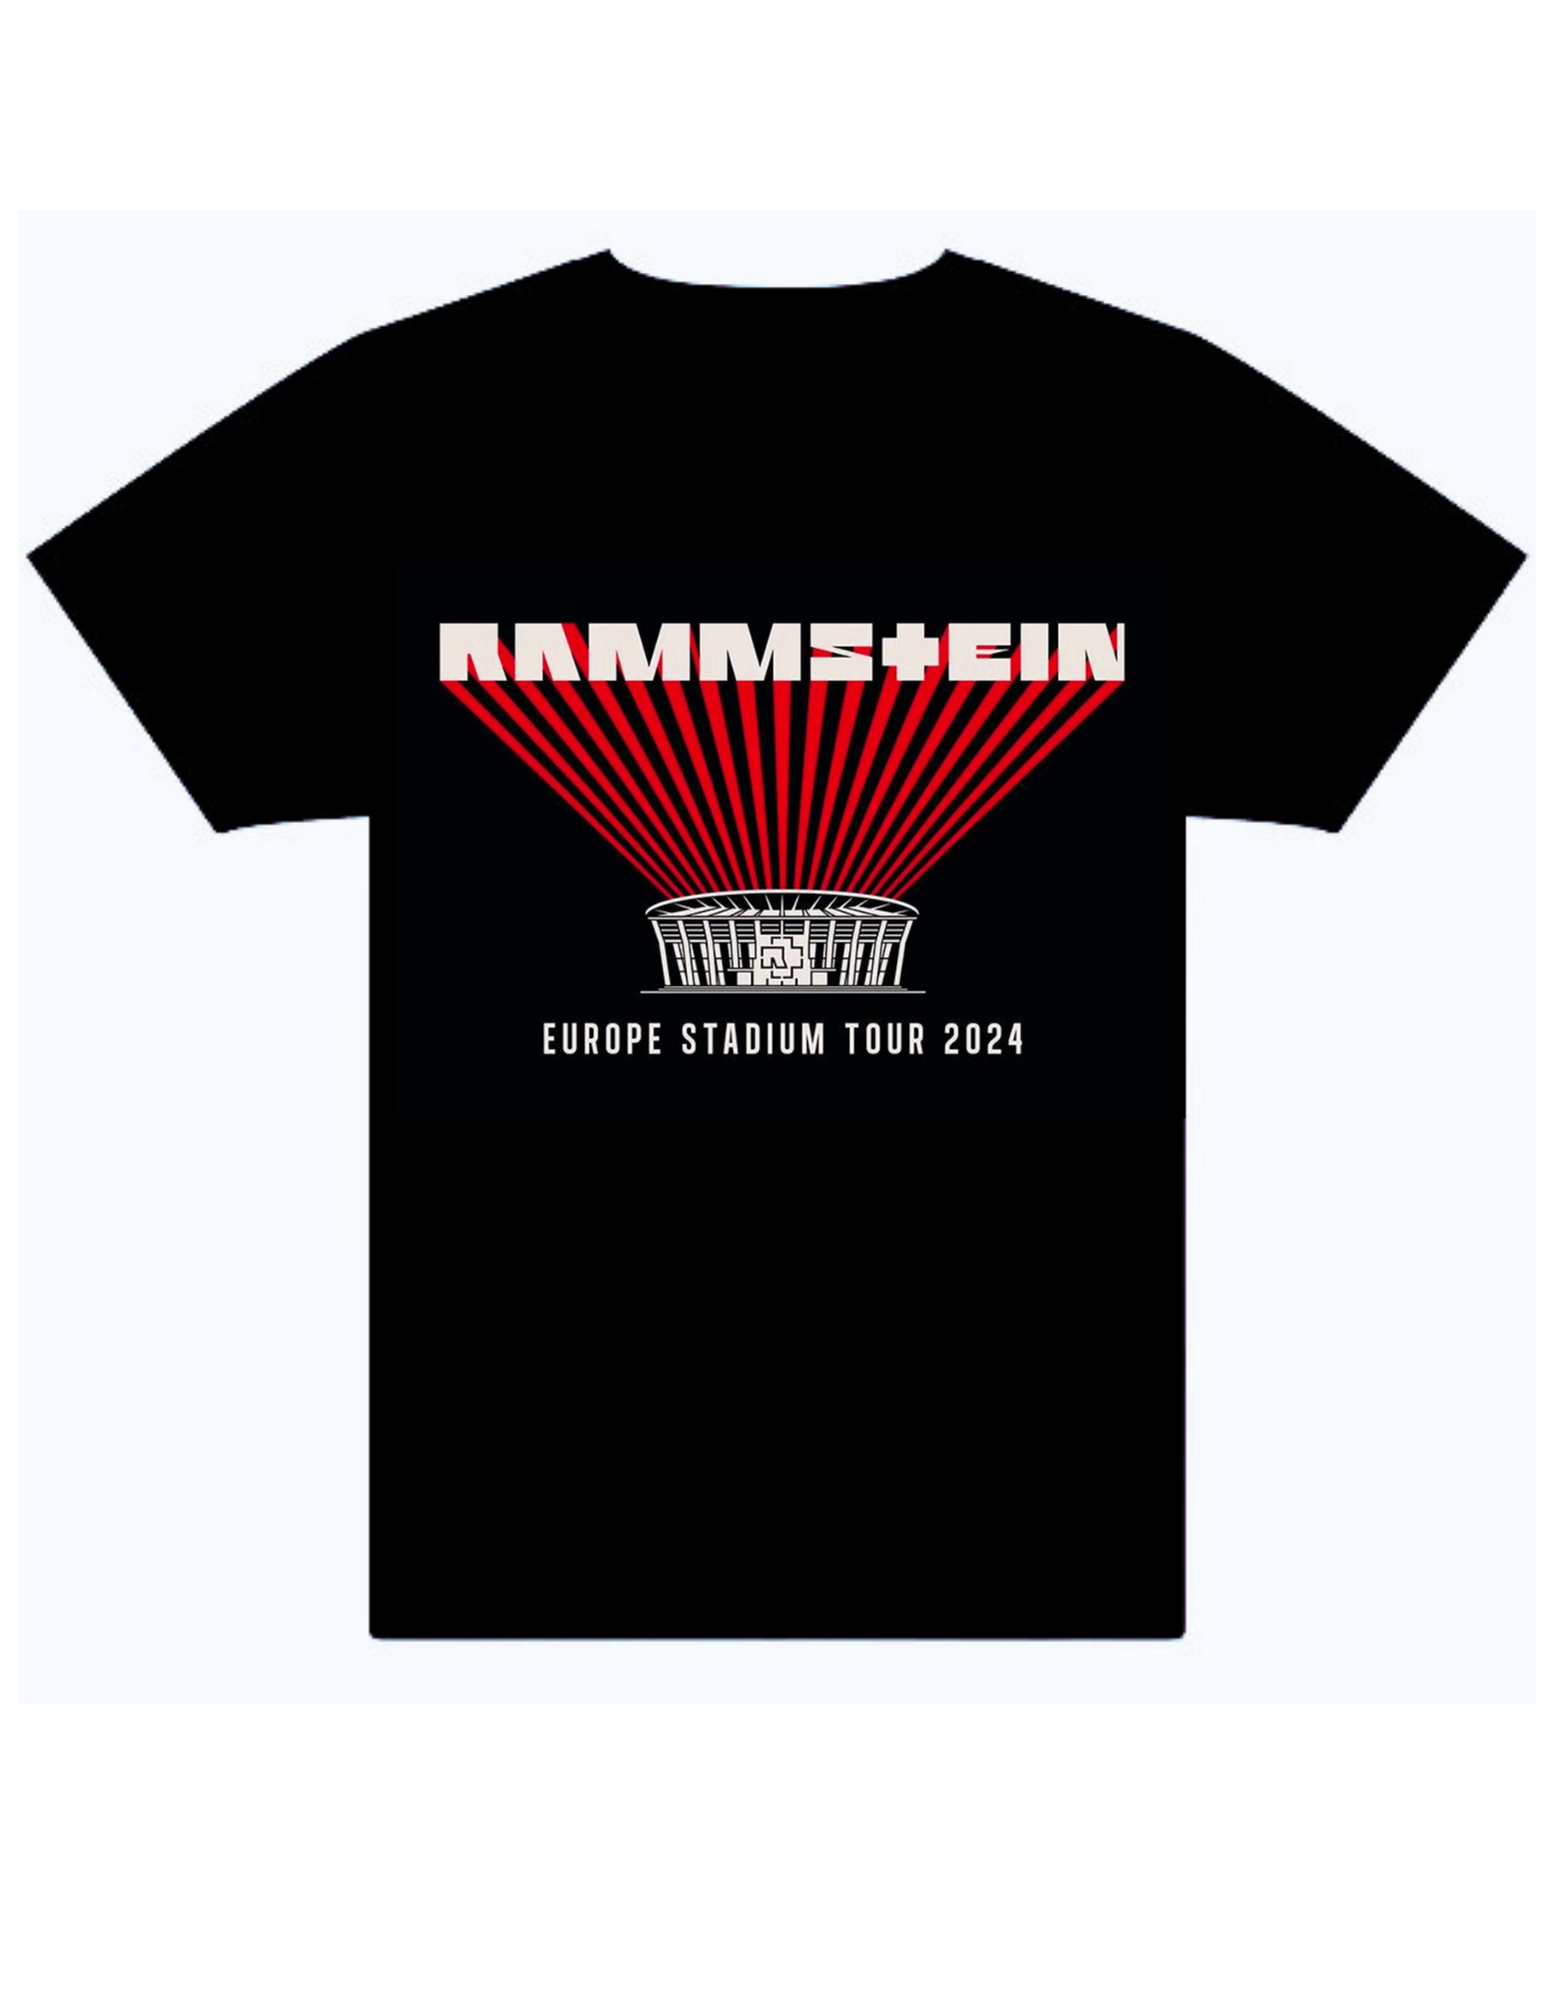 First order from the Rammstein shop! From Berlin to England in 4